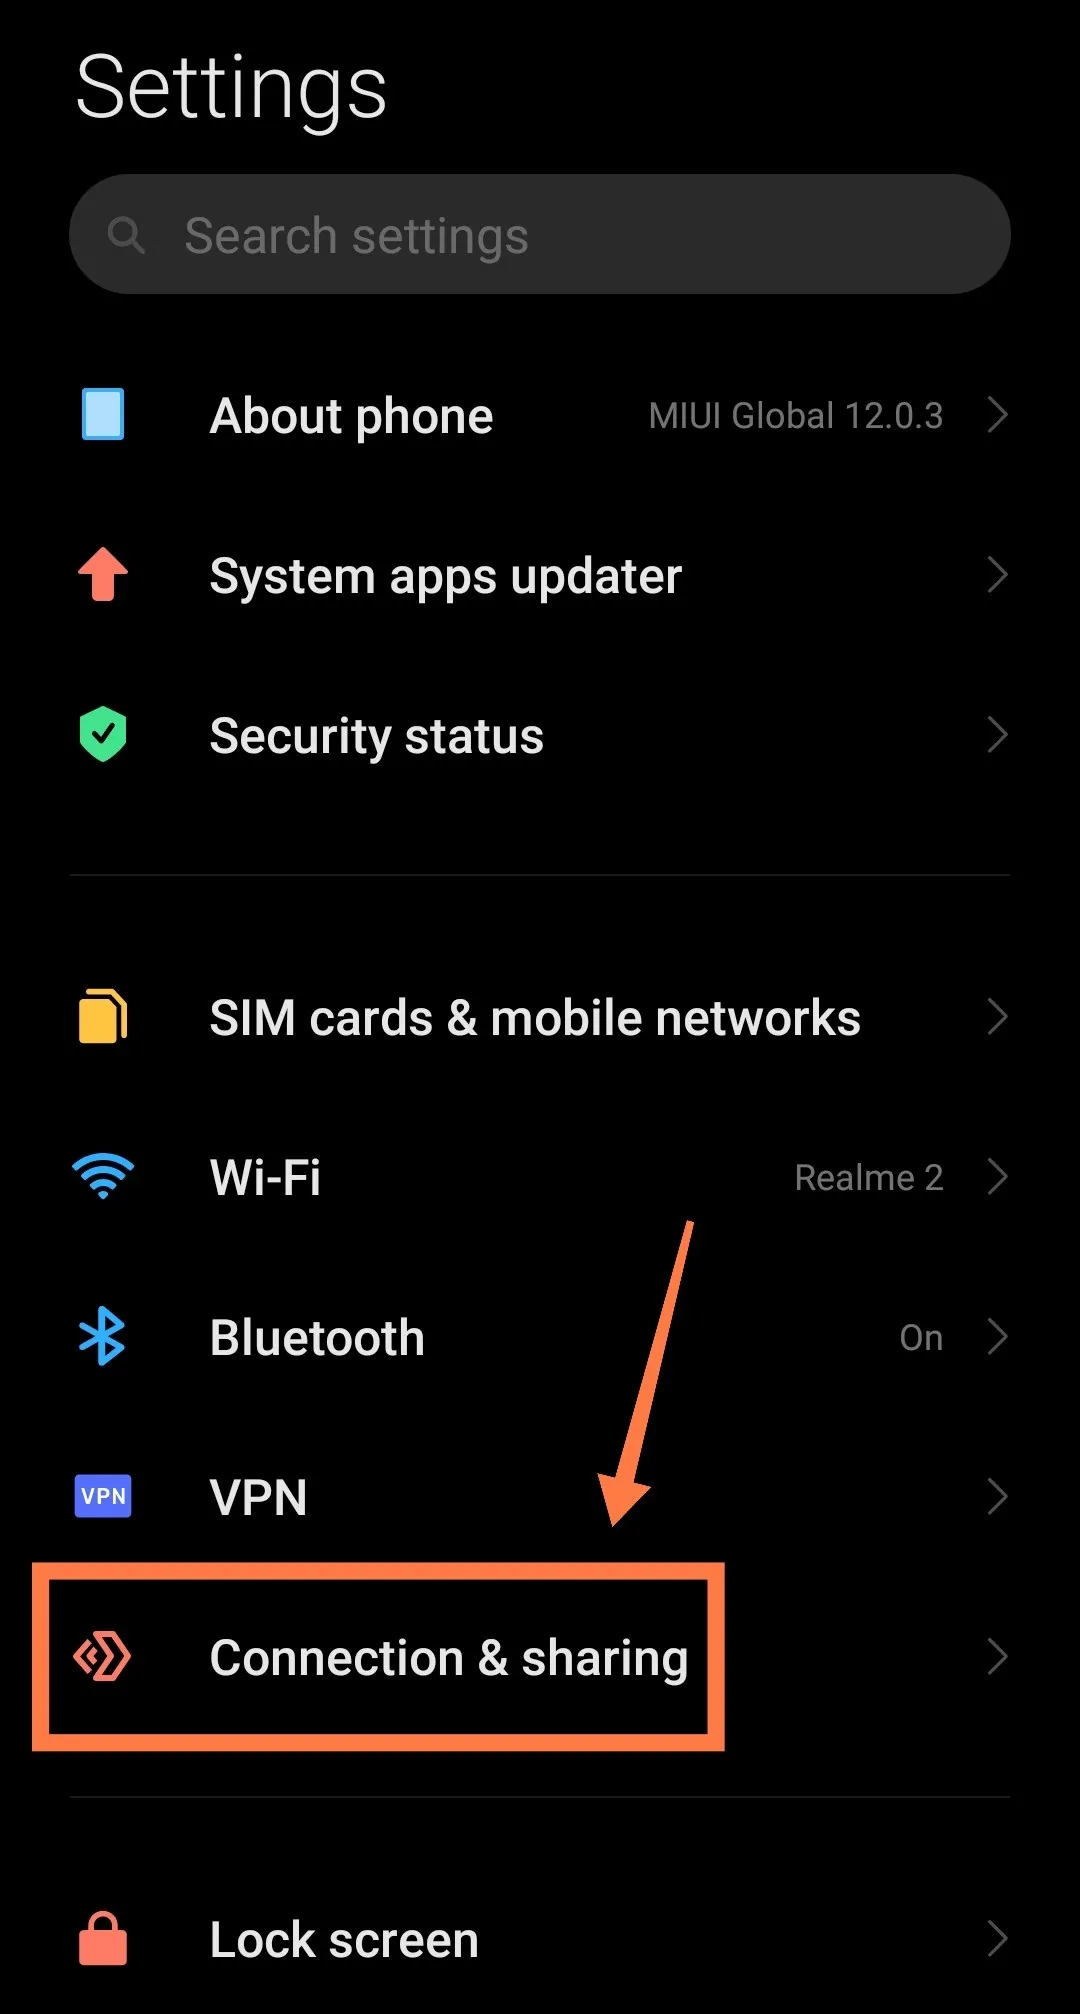 connection and sharing option